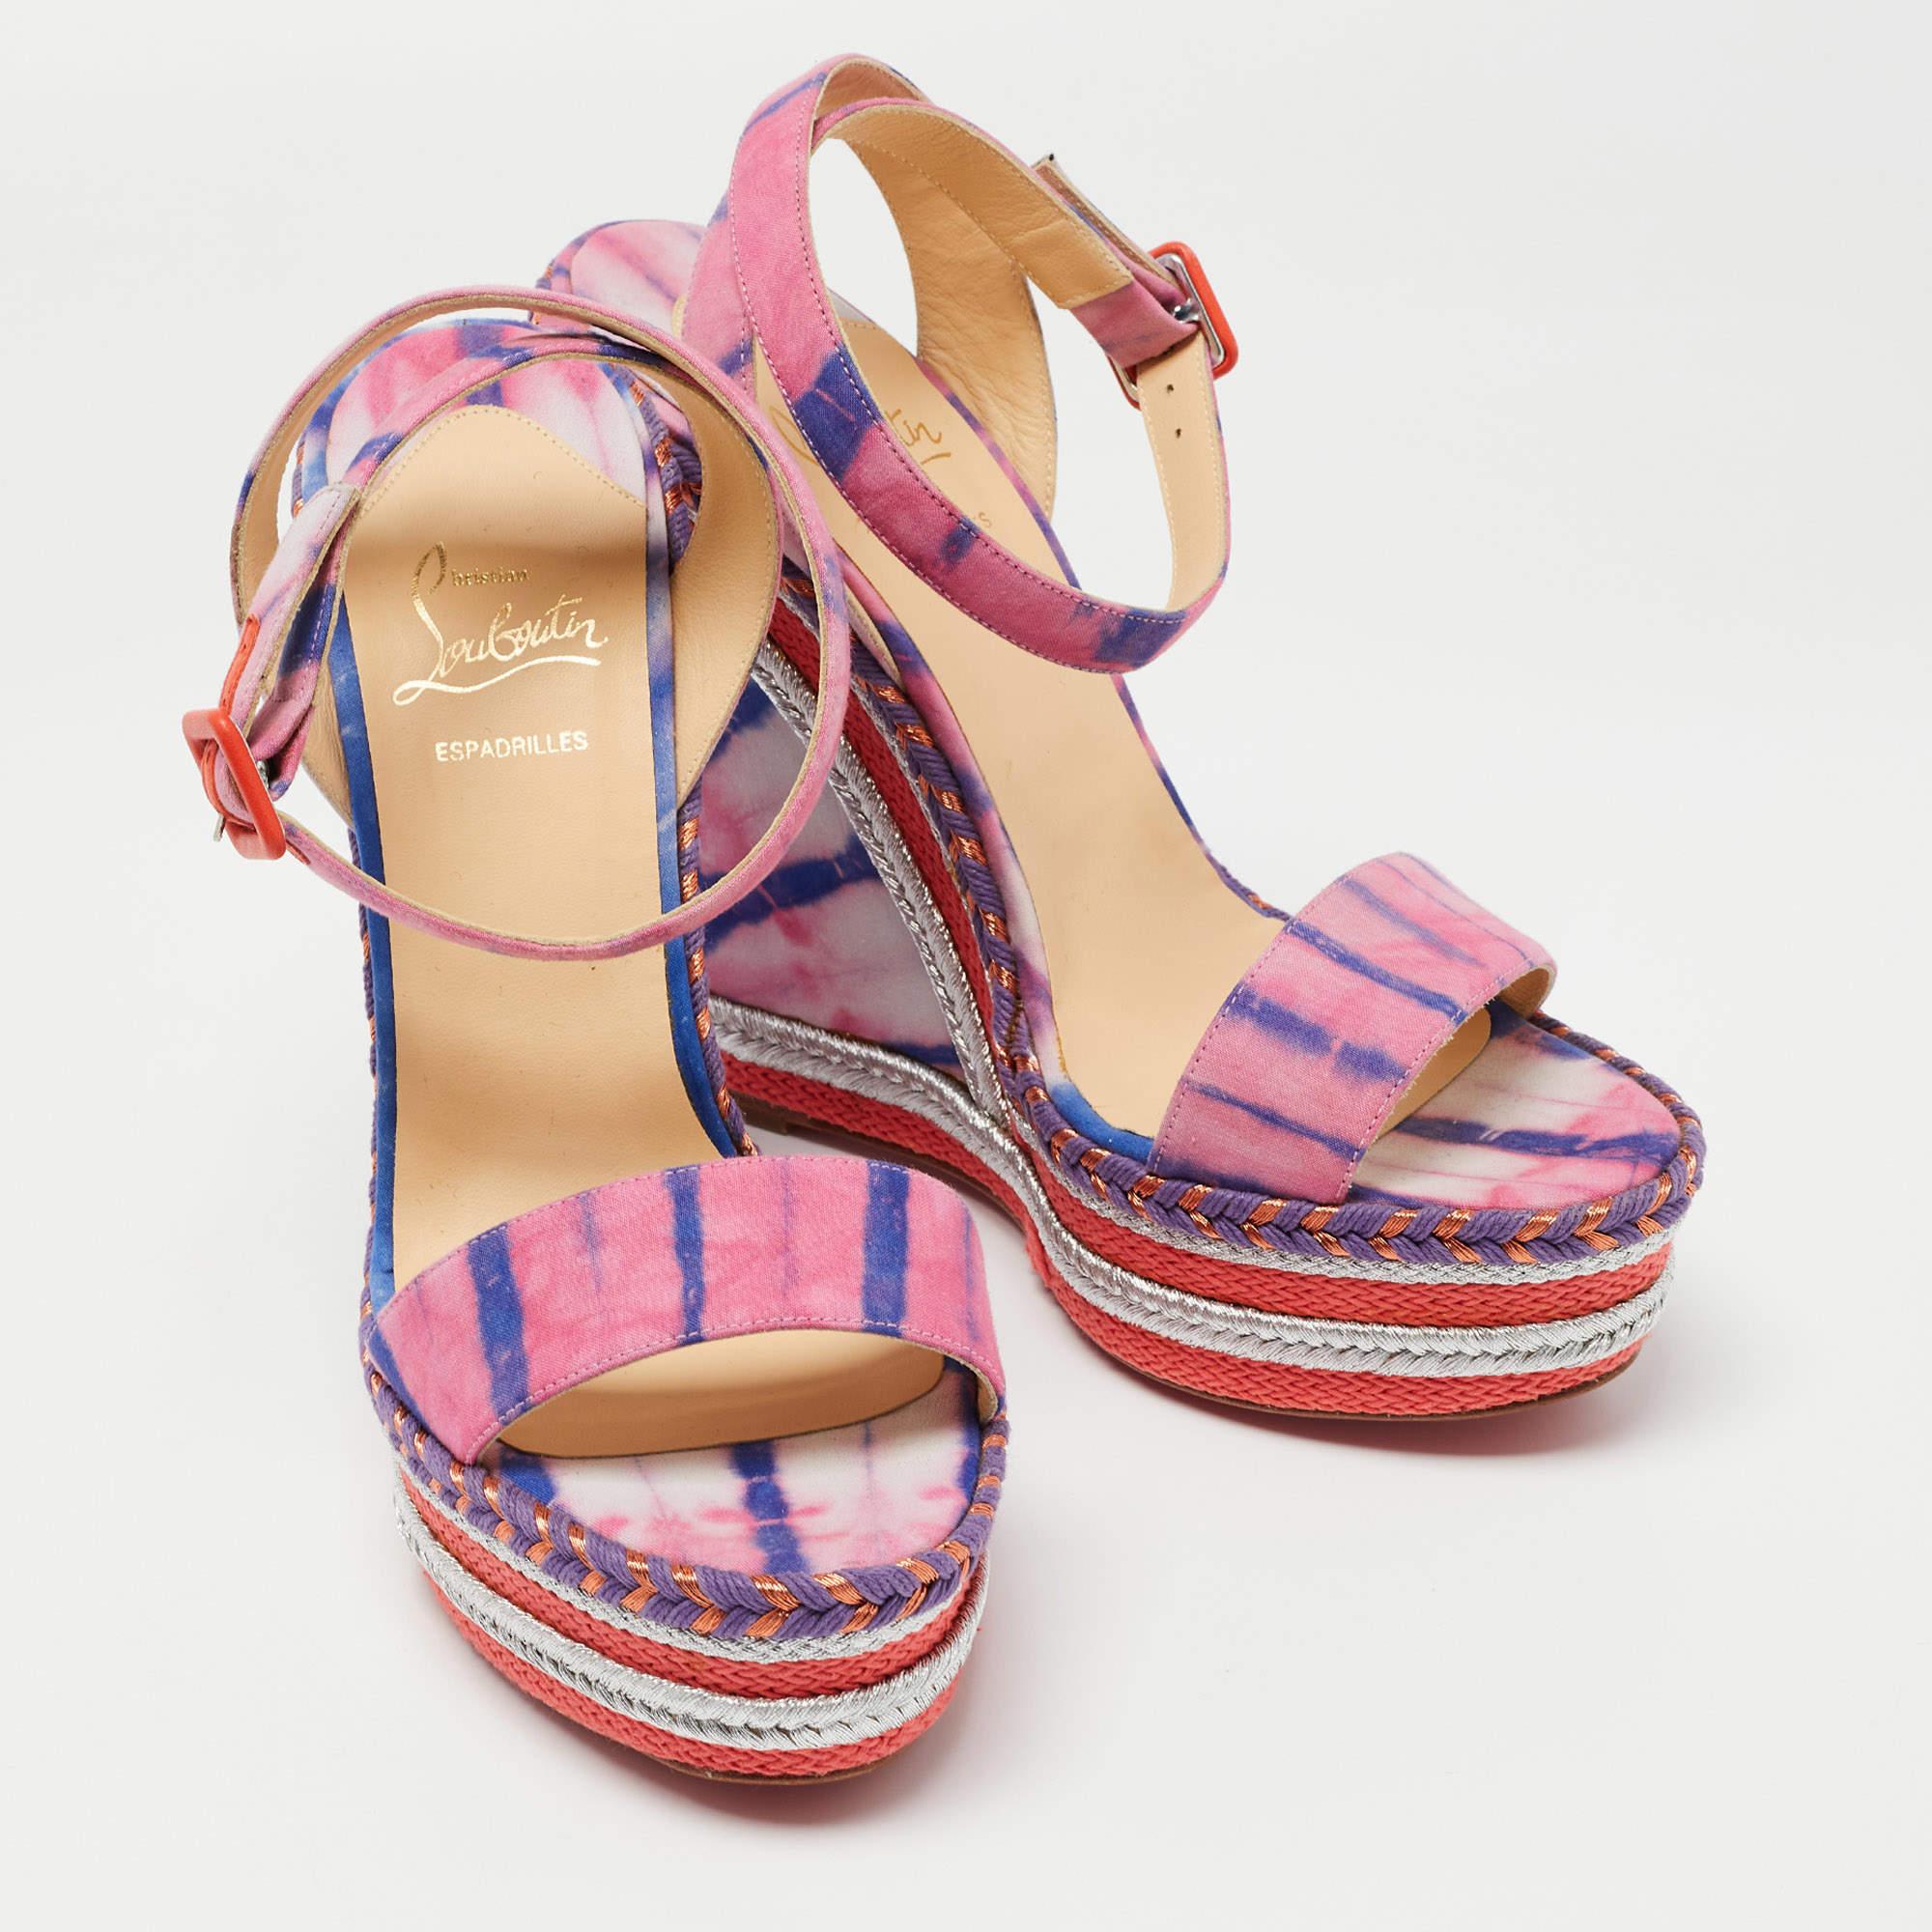 Women's Christian Louboutin Multicolor Tie-Dye Fabric Duplice Wedge Sandals Size 41 For Sale